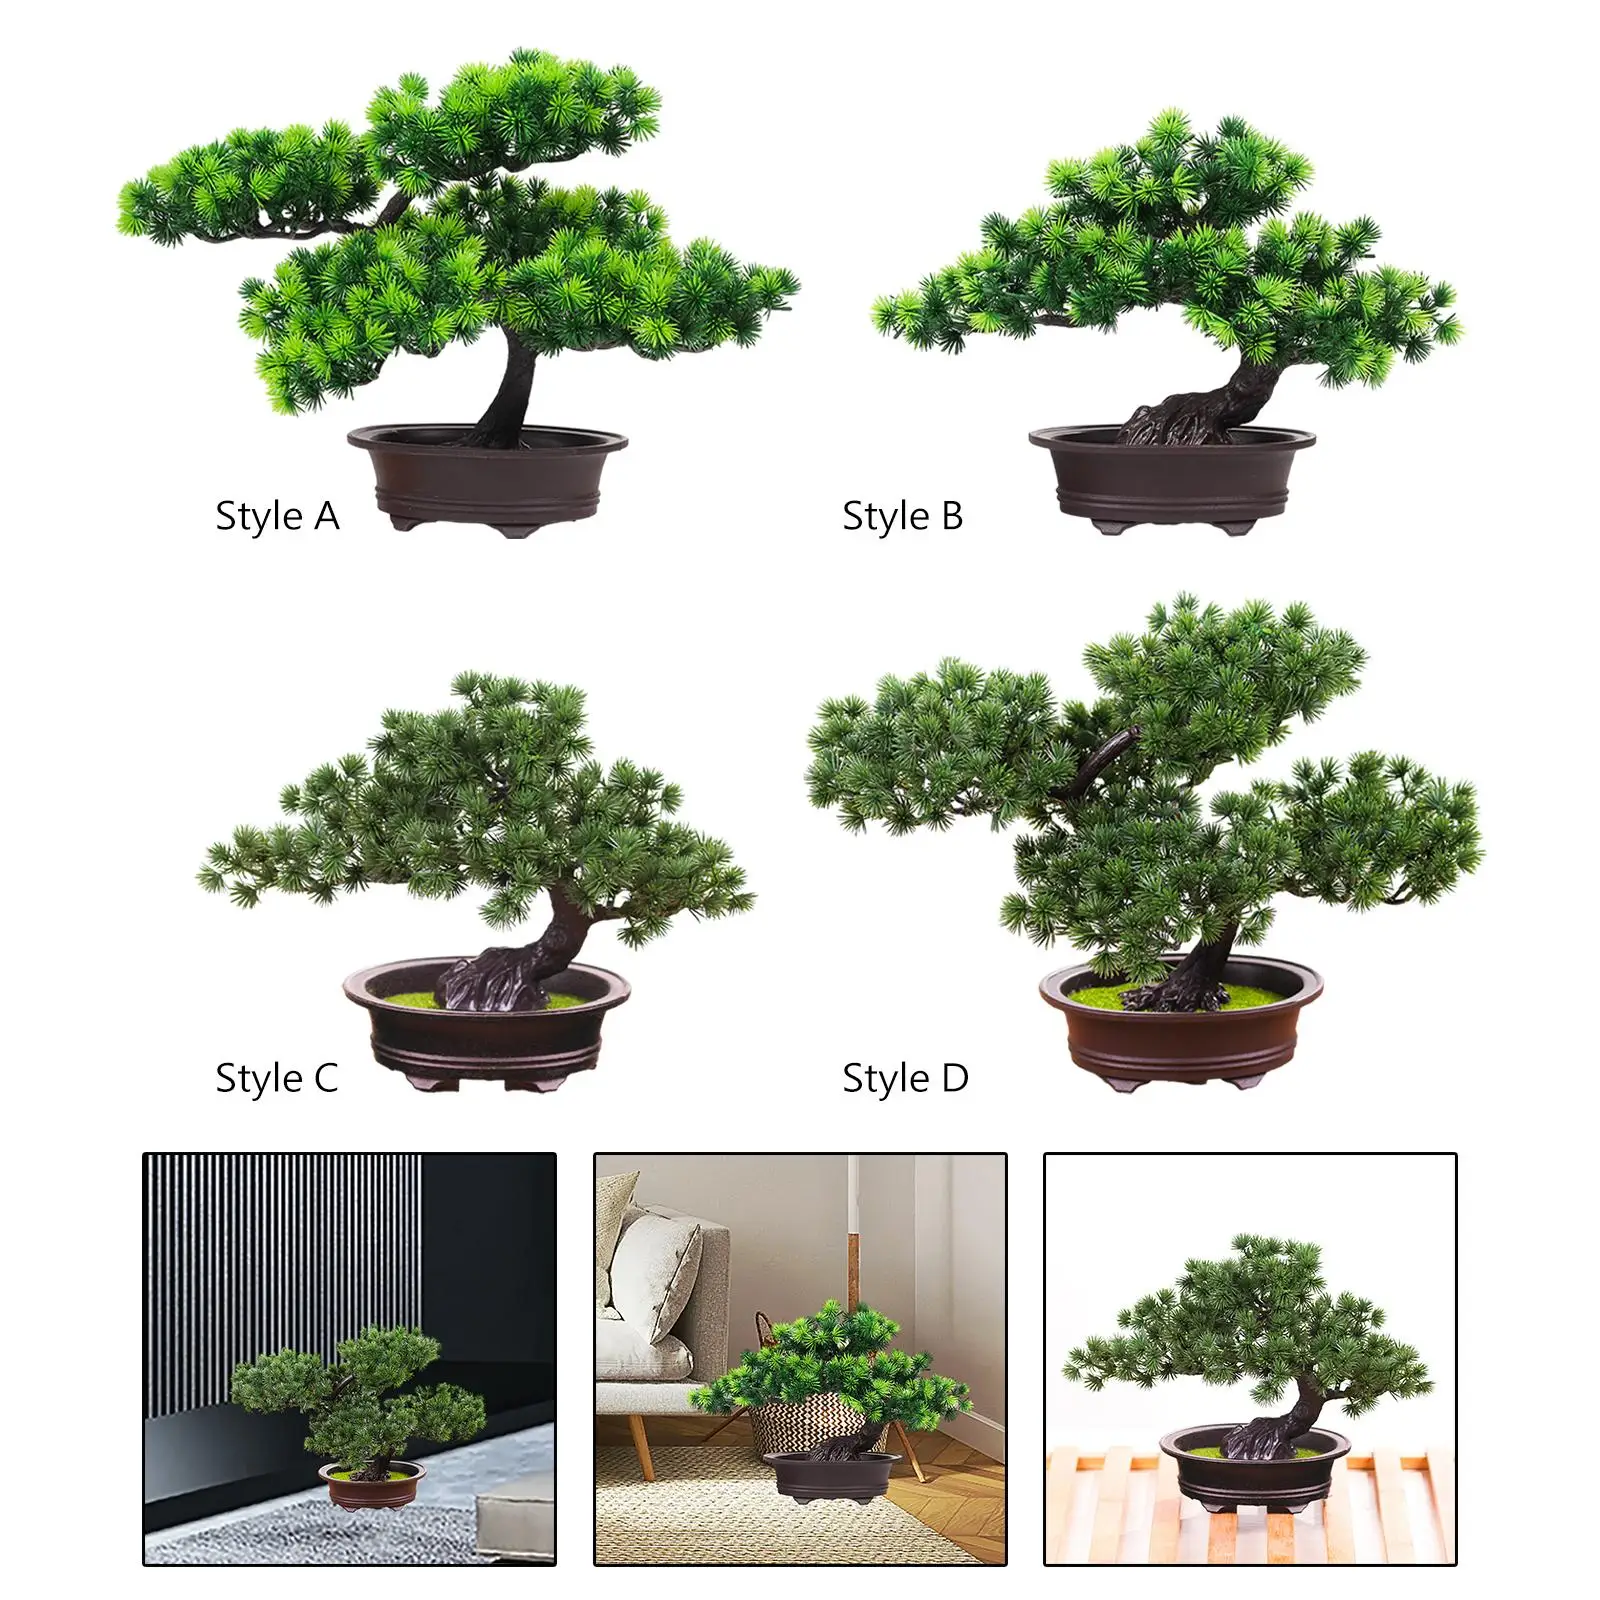 Artificial Potted Plants Welcoming Pine Tree Desktop Display Tabletop Decoration